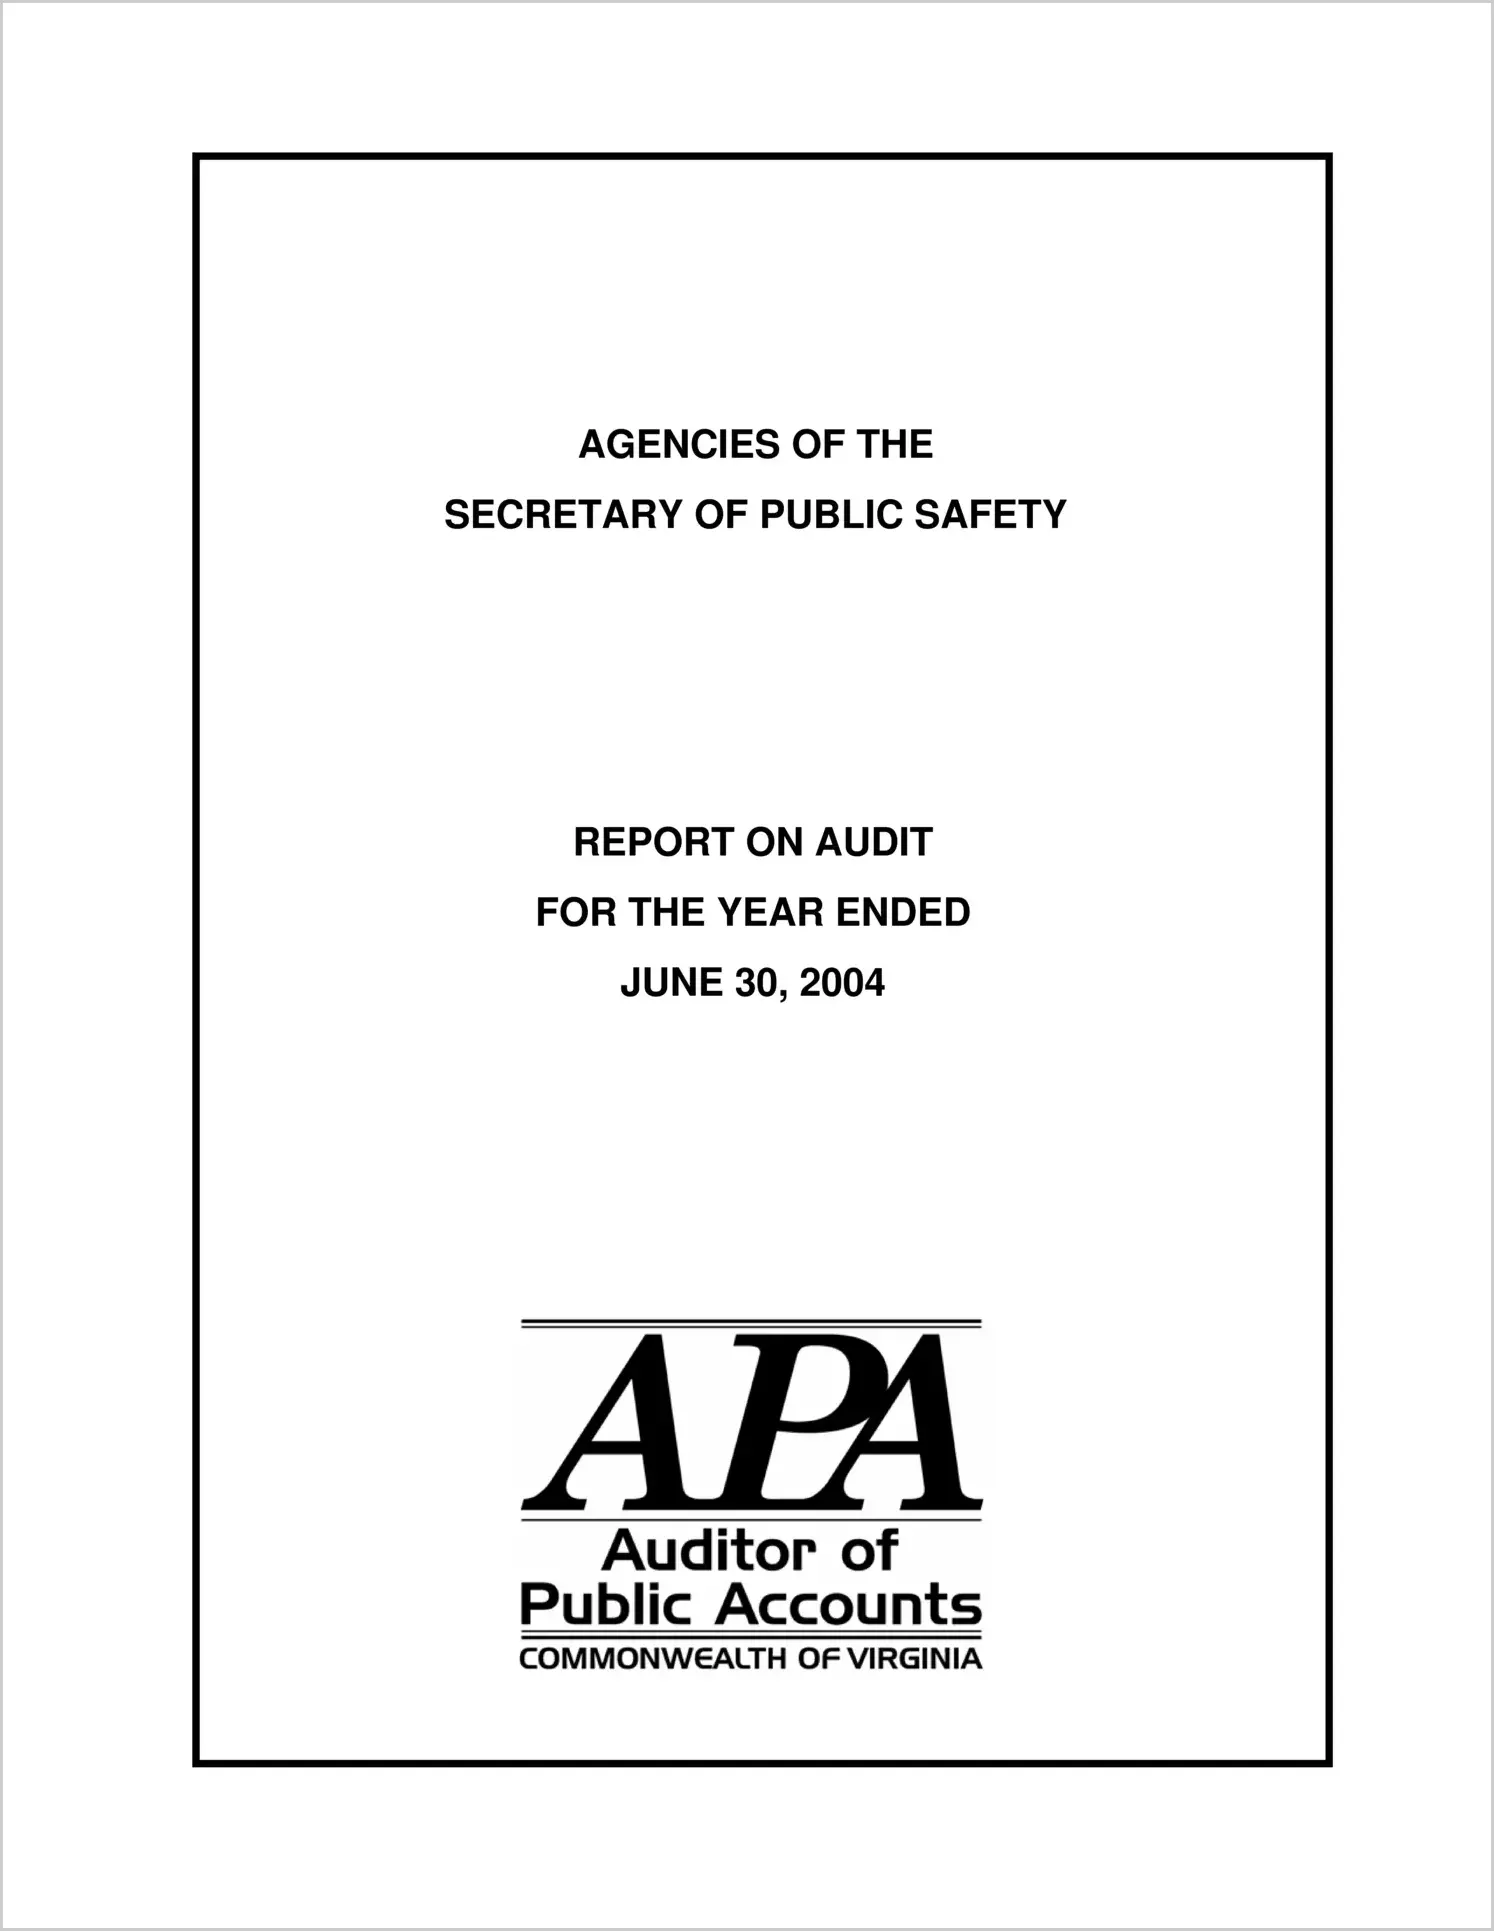 Agencies of the Secretary of Public Safety for the year ended June 30, 2004